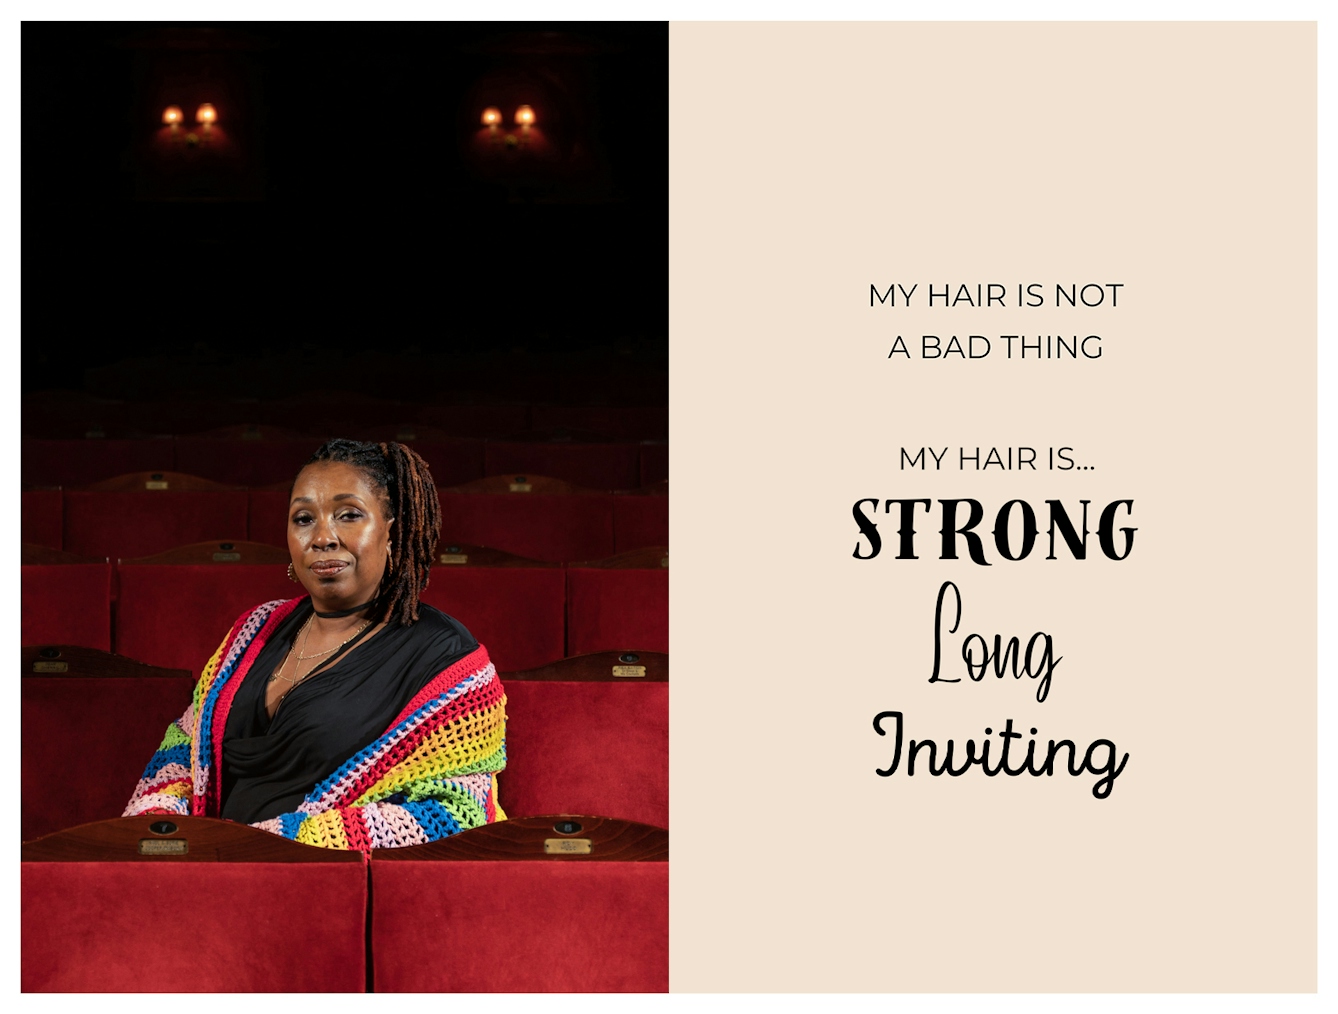 Photographic portrait and graphic design laid out next to each other. On the left is a portrait of a Black woman sat on a red chair in a theatre. She has her hair in locs, tied up at the side and is wearing a knitted multi-coloured shawl around her shoulders. She is looking straight to camera with a neutral relaxed expression. The graphic to the right has a beige background on which are the words 'My hair is not a bad thing. My hair is...strong, long, inviting'. These last three words are each in a different font to emphasise their meaning.